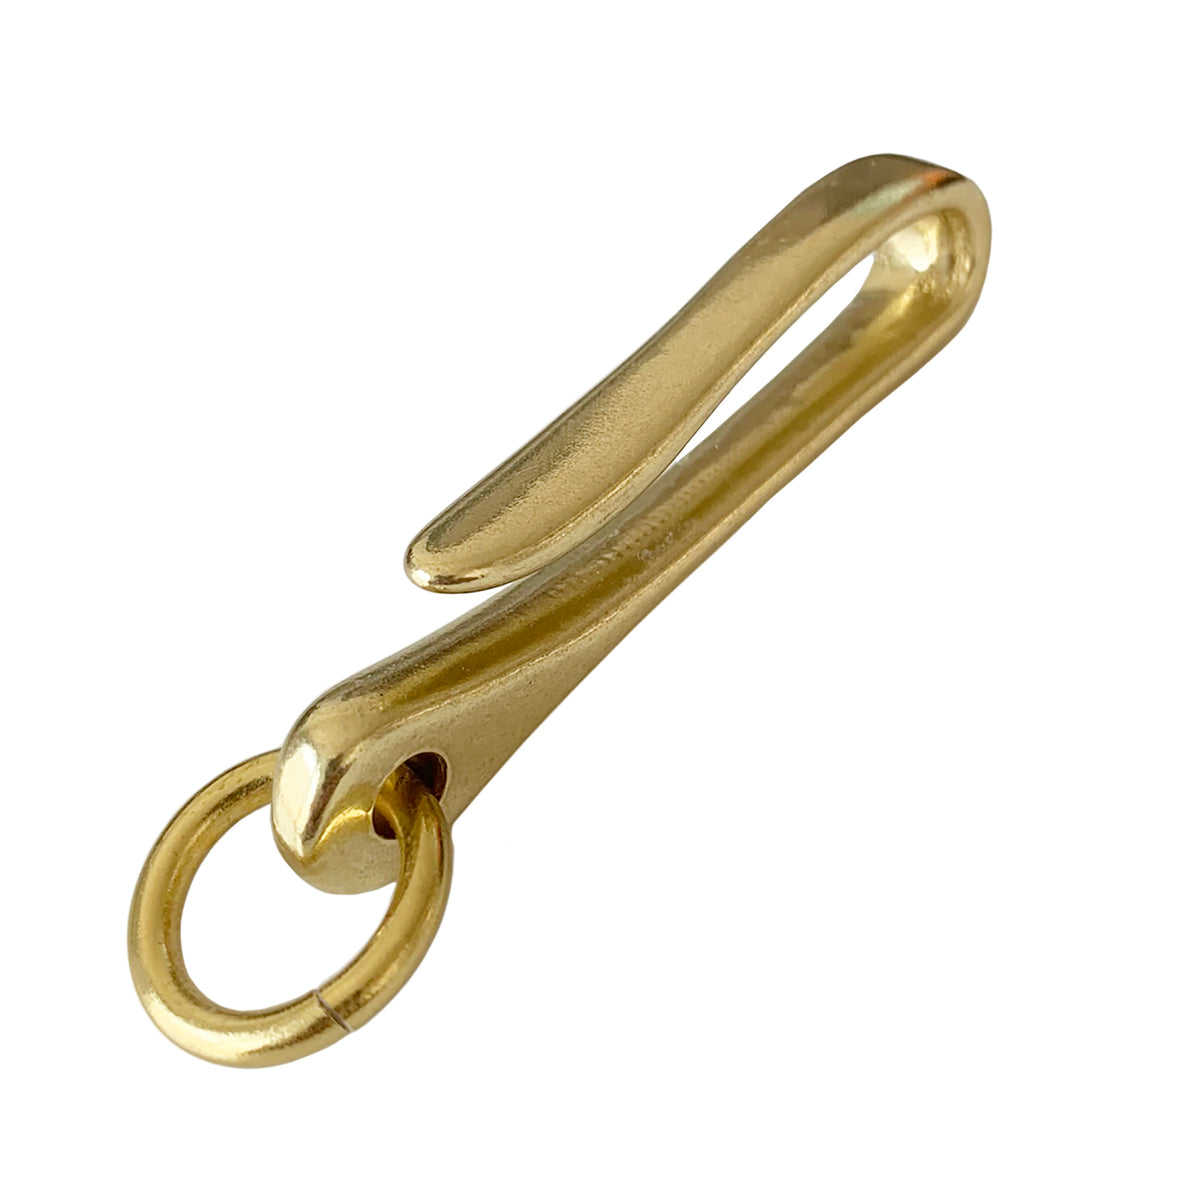 Keychain Fish Hook Hardware (Solid Brass) Medium - 60mm by Rocky Mountain Leather Supply